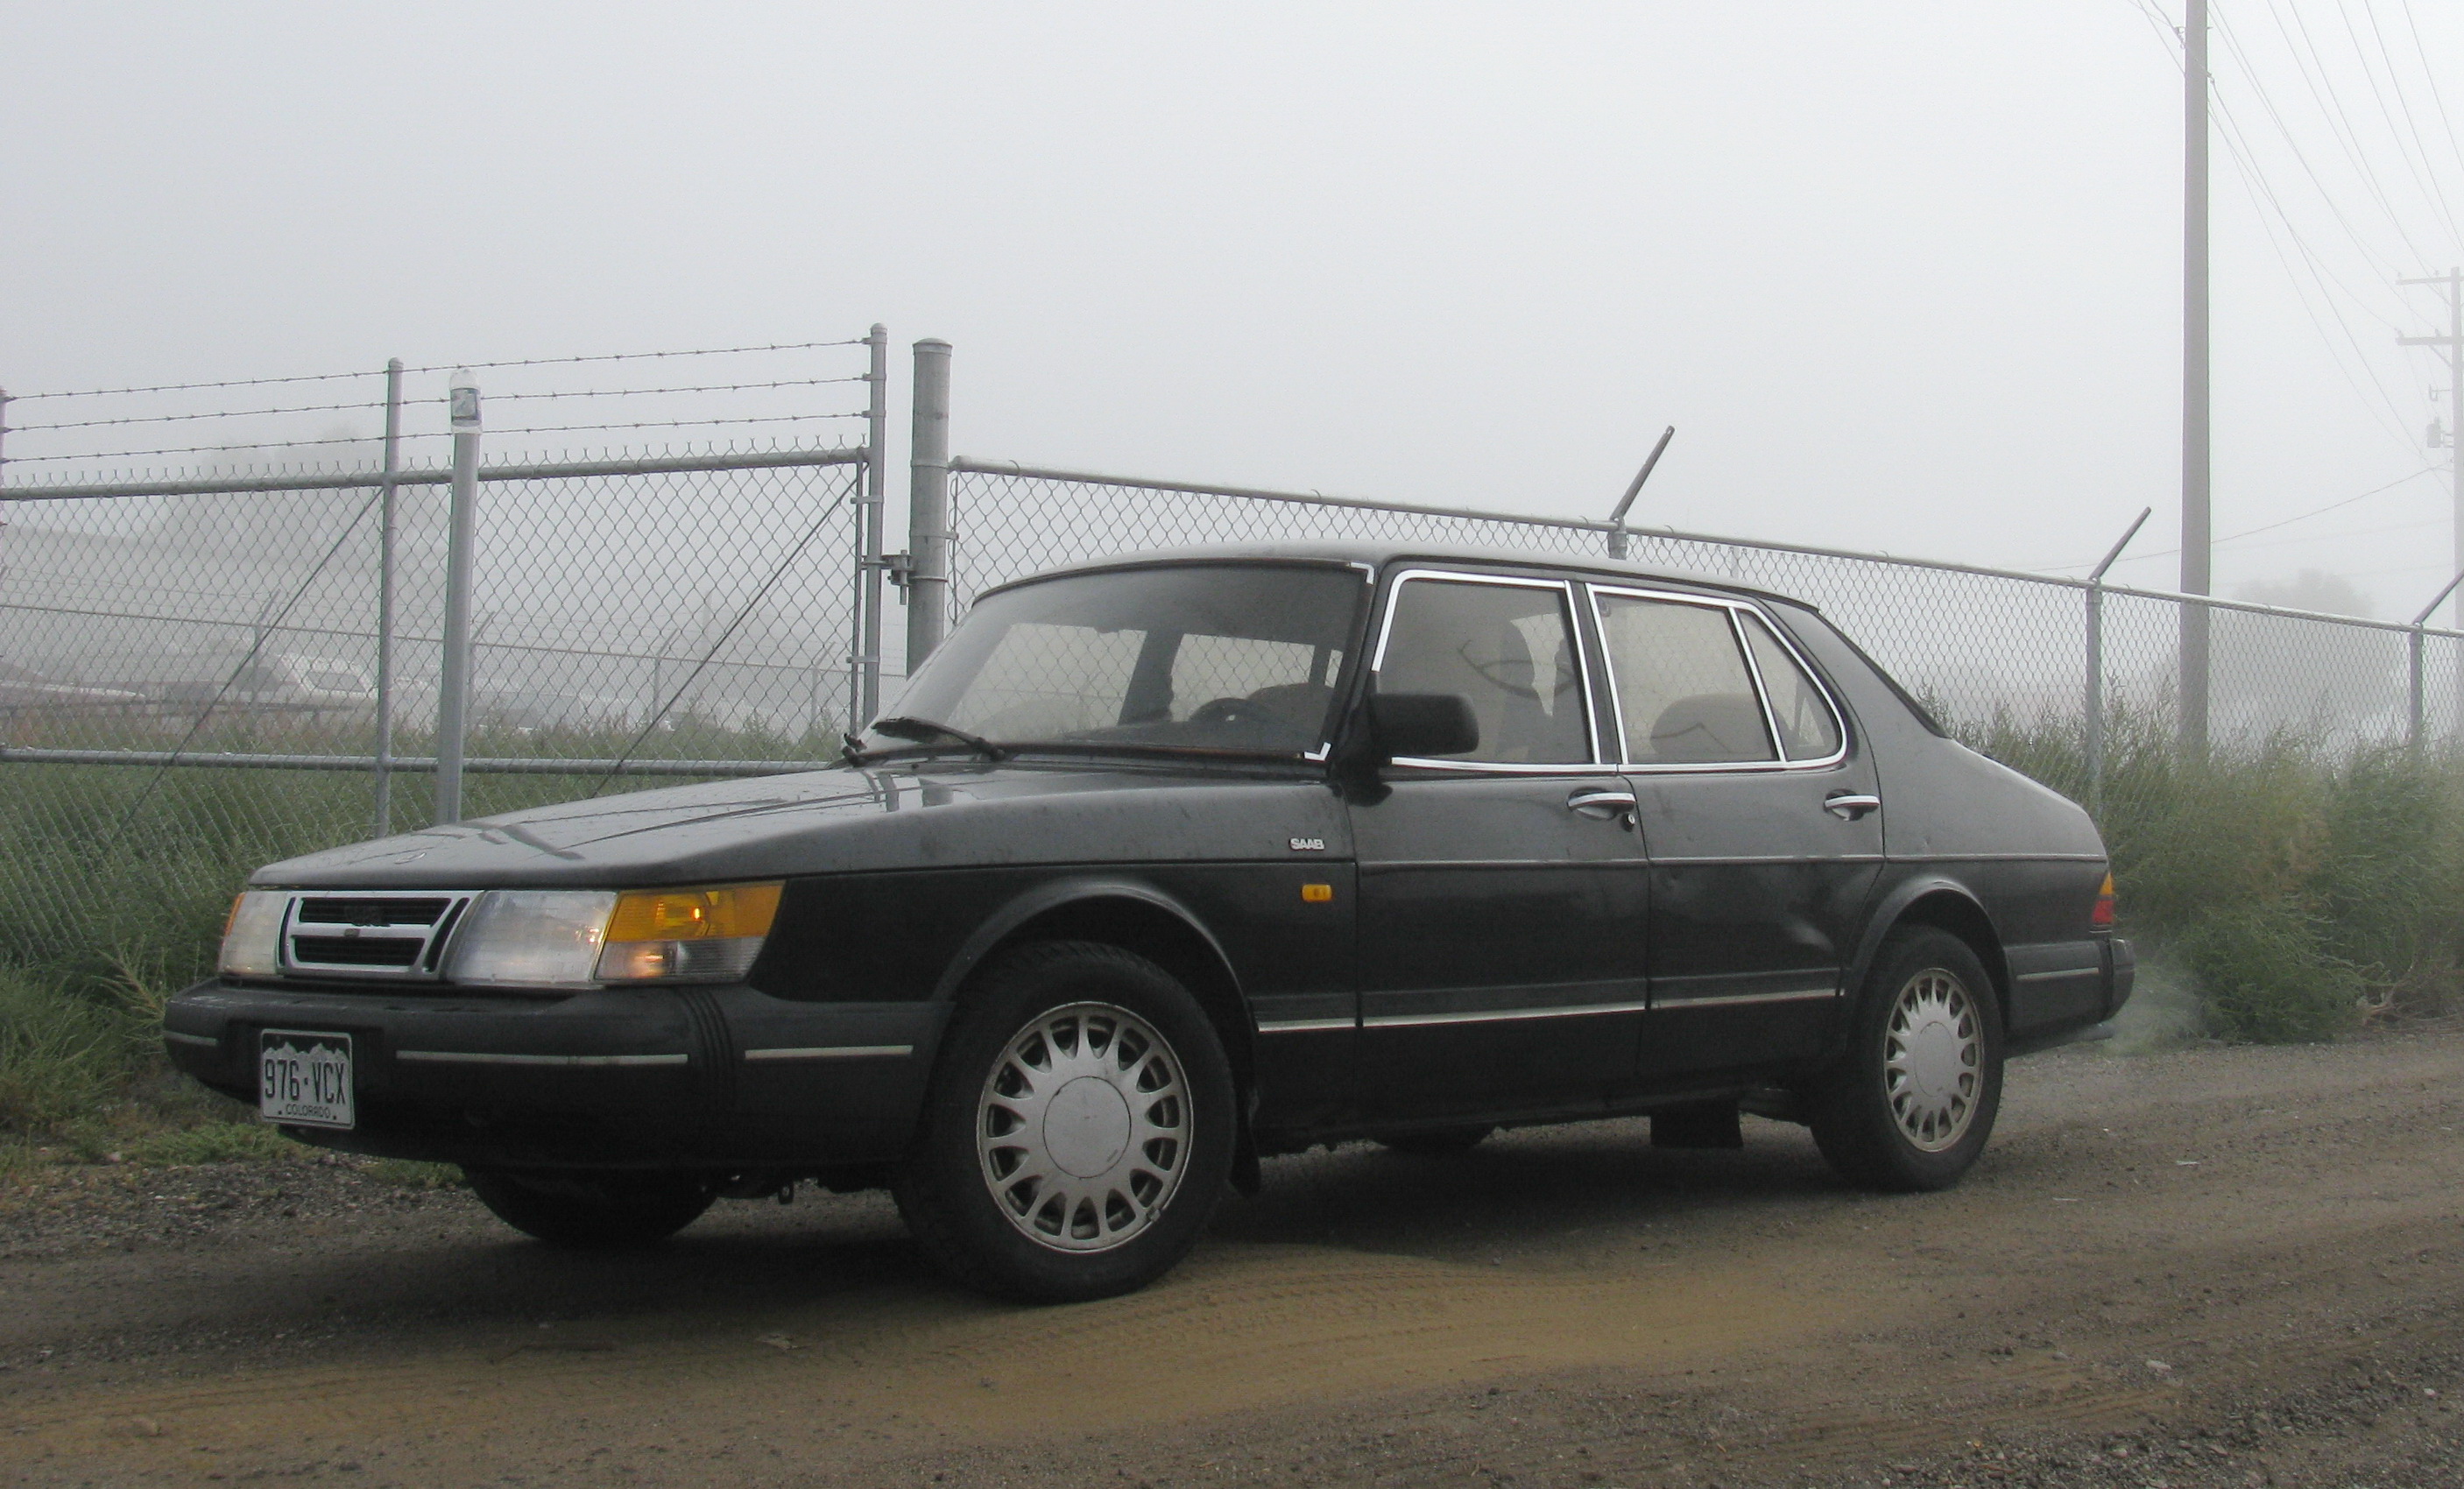 Saab 900i 20l-16v Photo Gallery: Photo #12 out of 5, Image Size ...